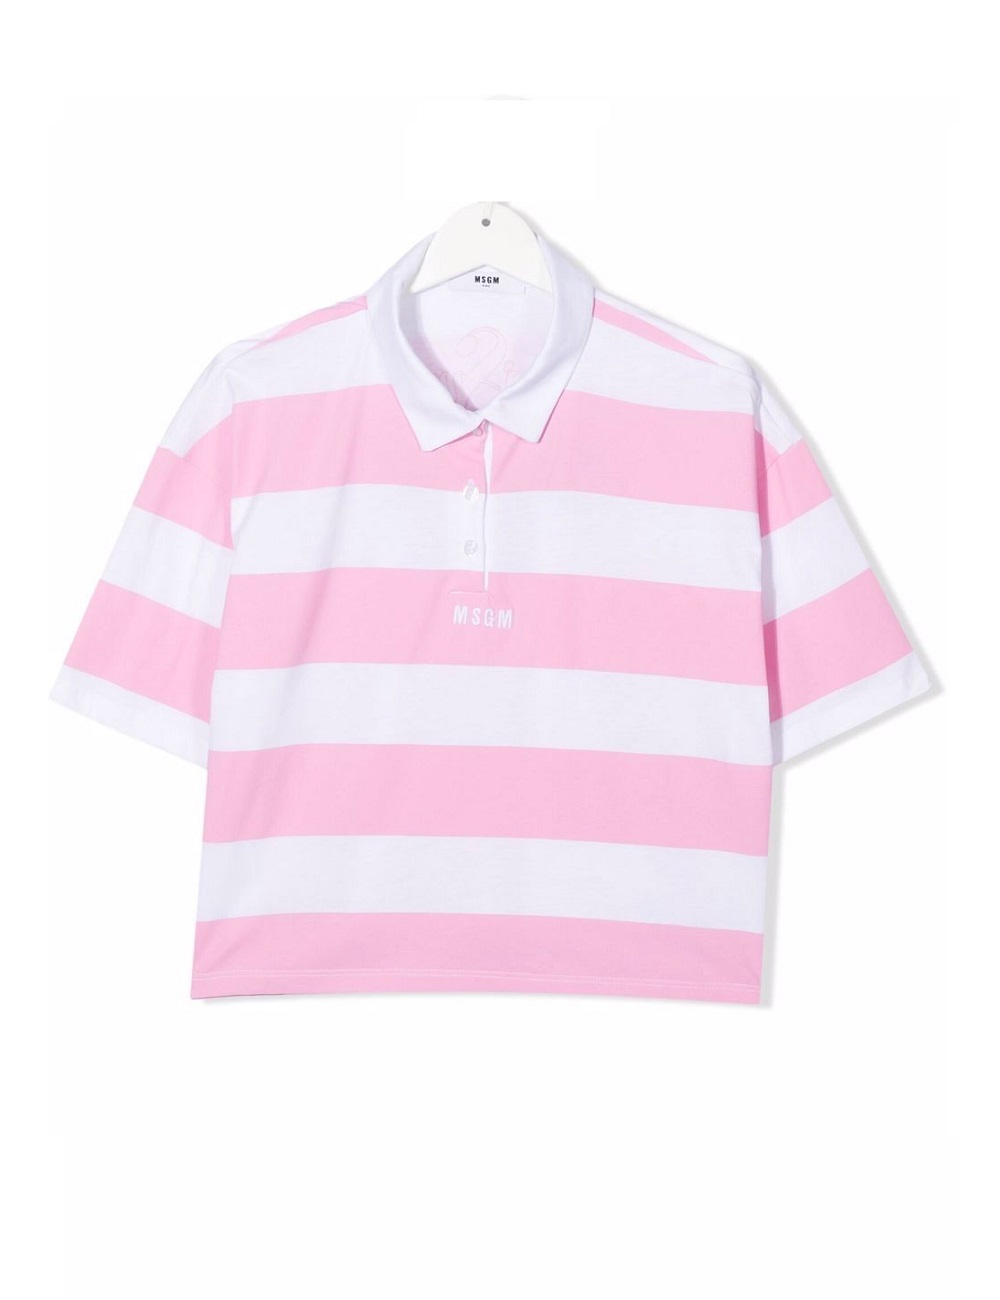 [SS22 MSGM] JERSEY POLO SHIRT GIRL MS028773_WHITE-PINK 4.6.14Y